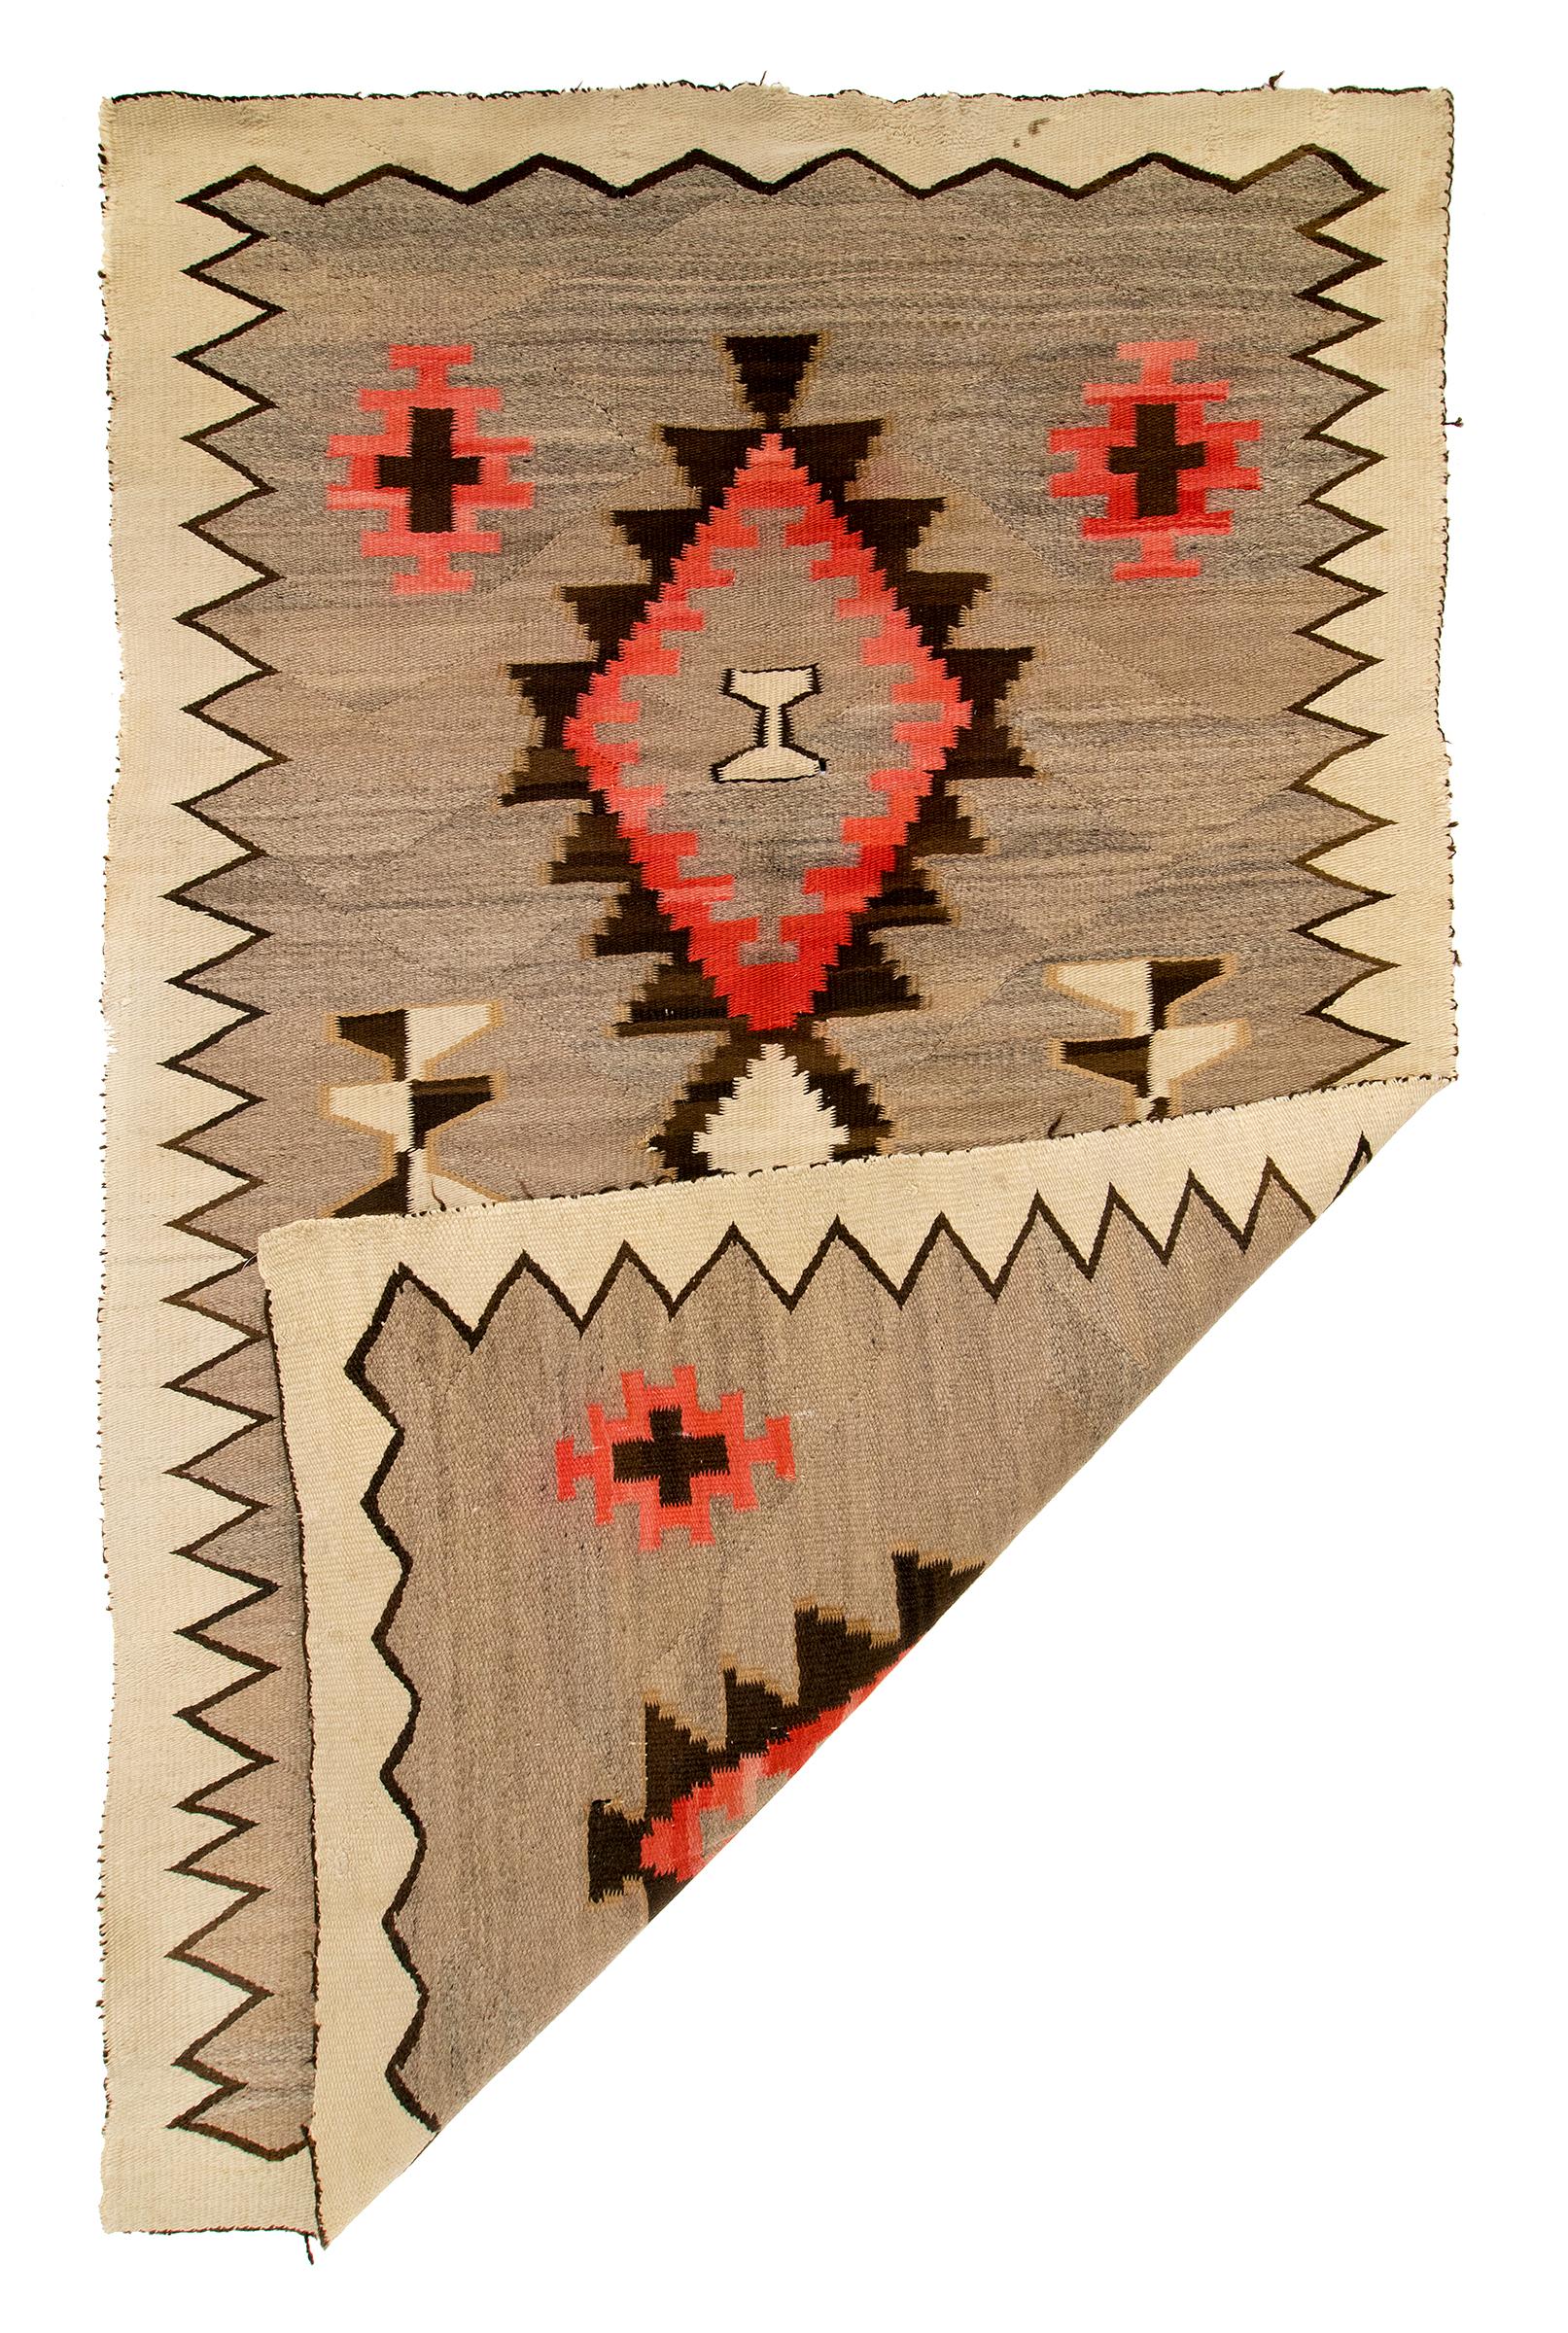 Vintage Navajo rug, Pan-Reservation, Klagetoh style, Trading Post area rug circa 1940s - 1950s. Hand woven of native hand spun wool in natural fleece colors of gray, ivory and brown with aniline dyed red. Design elements include crosses, diamonds,